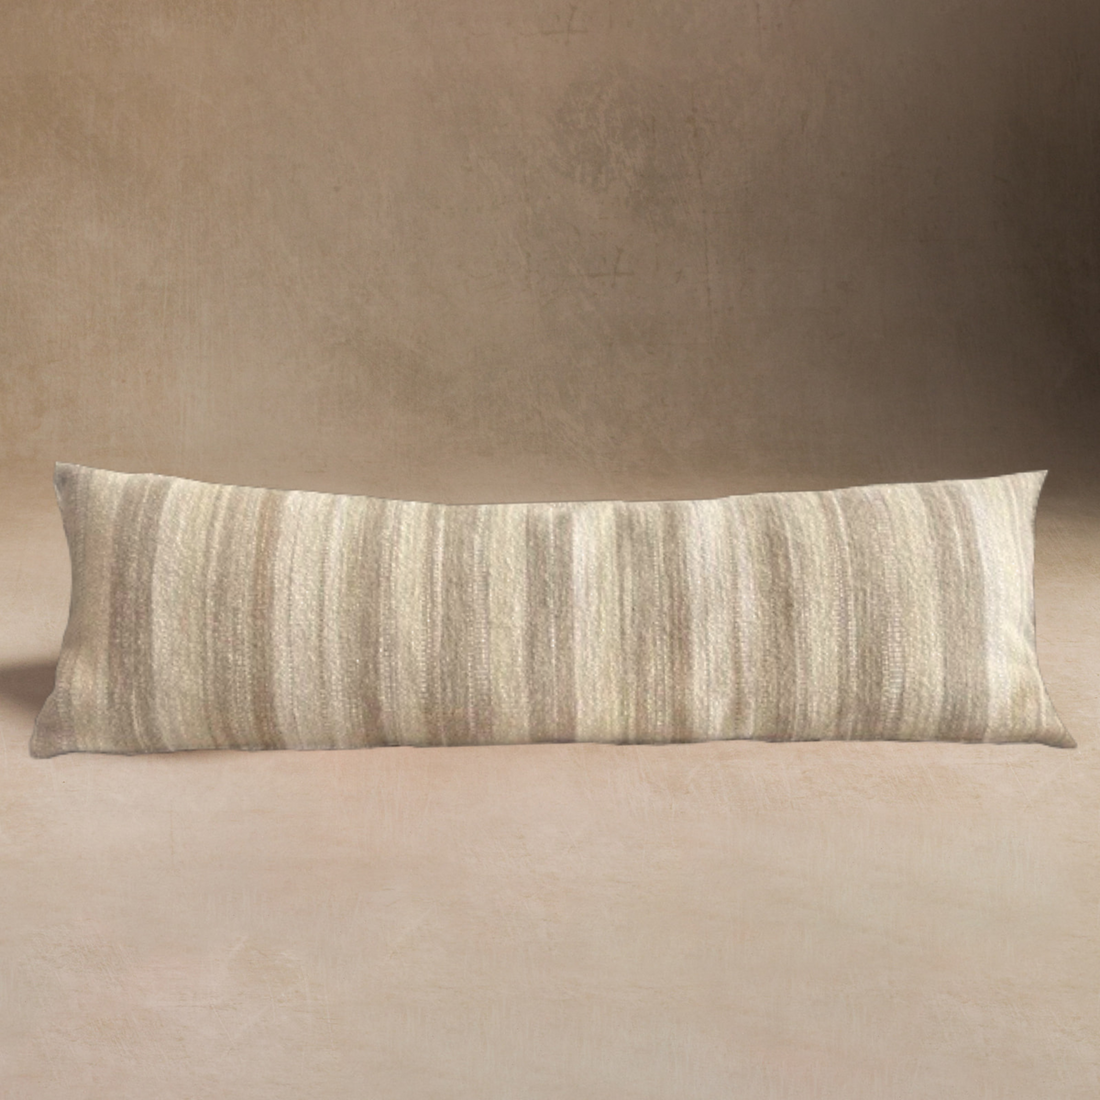 50% Applied at Checkout- Studio H Collection Nadine Body Pillow- Natural & White